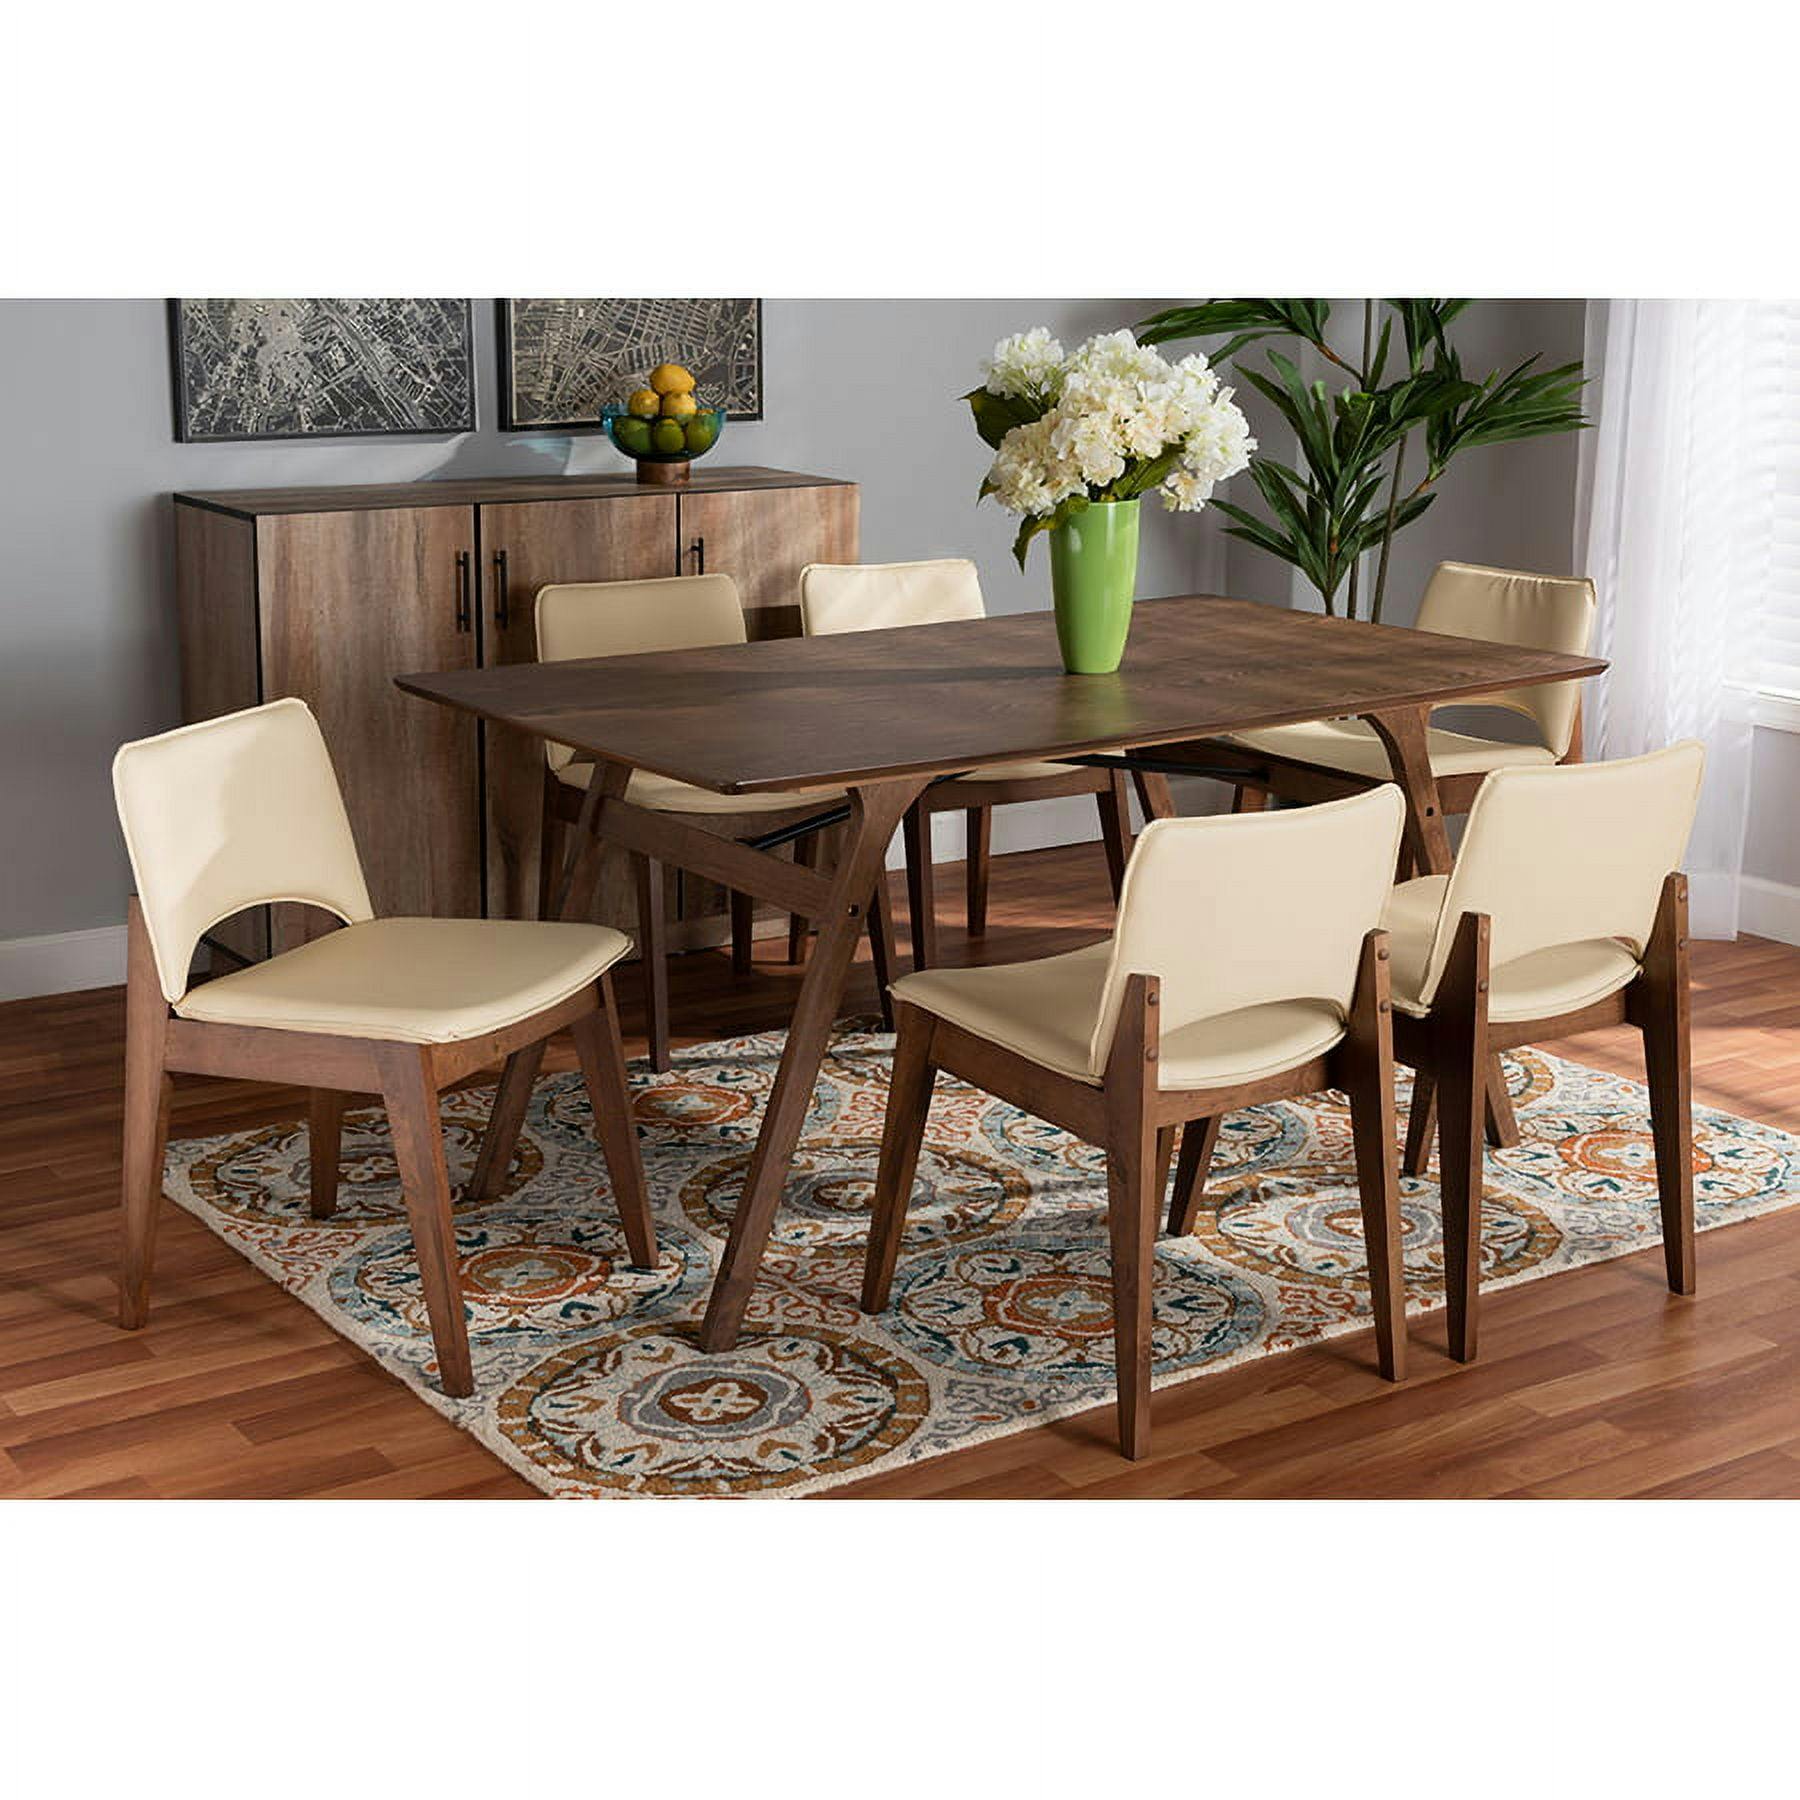 Afton Walnut Brown and Beige Faux Leather 7-Piece Dining Set